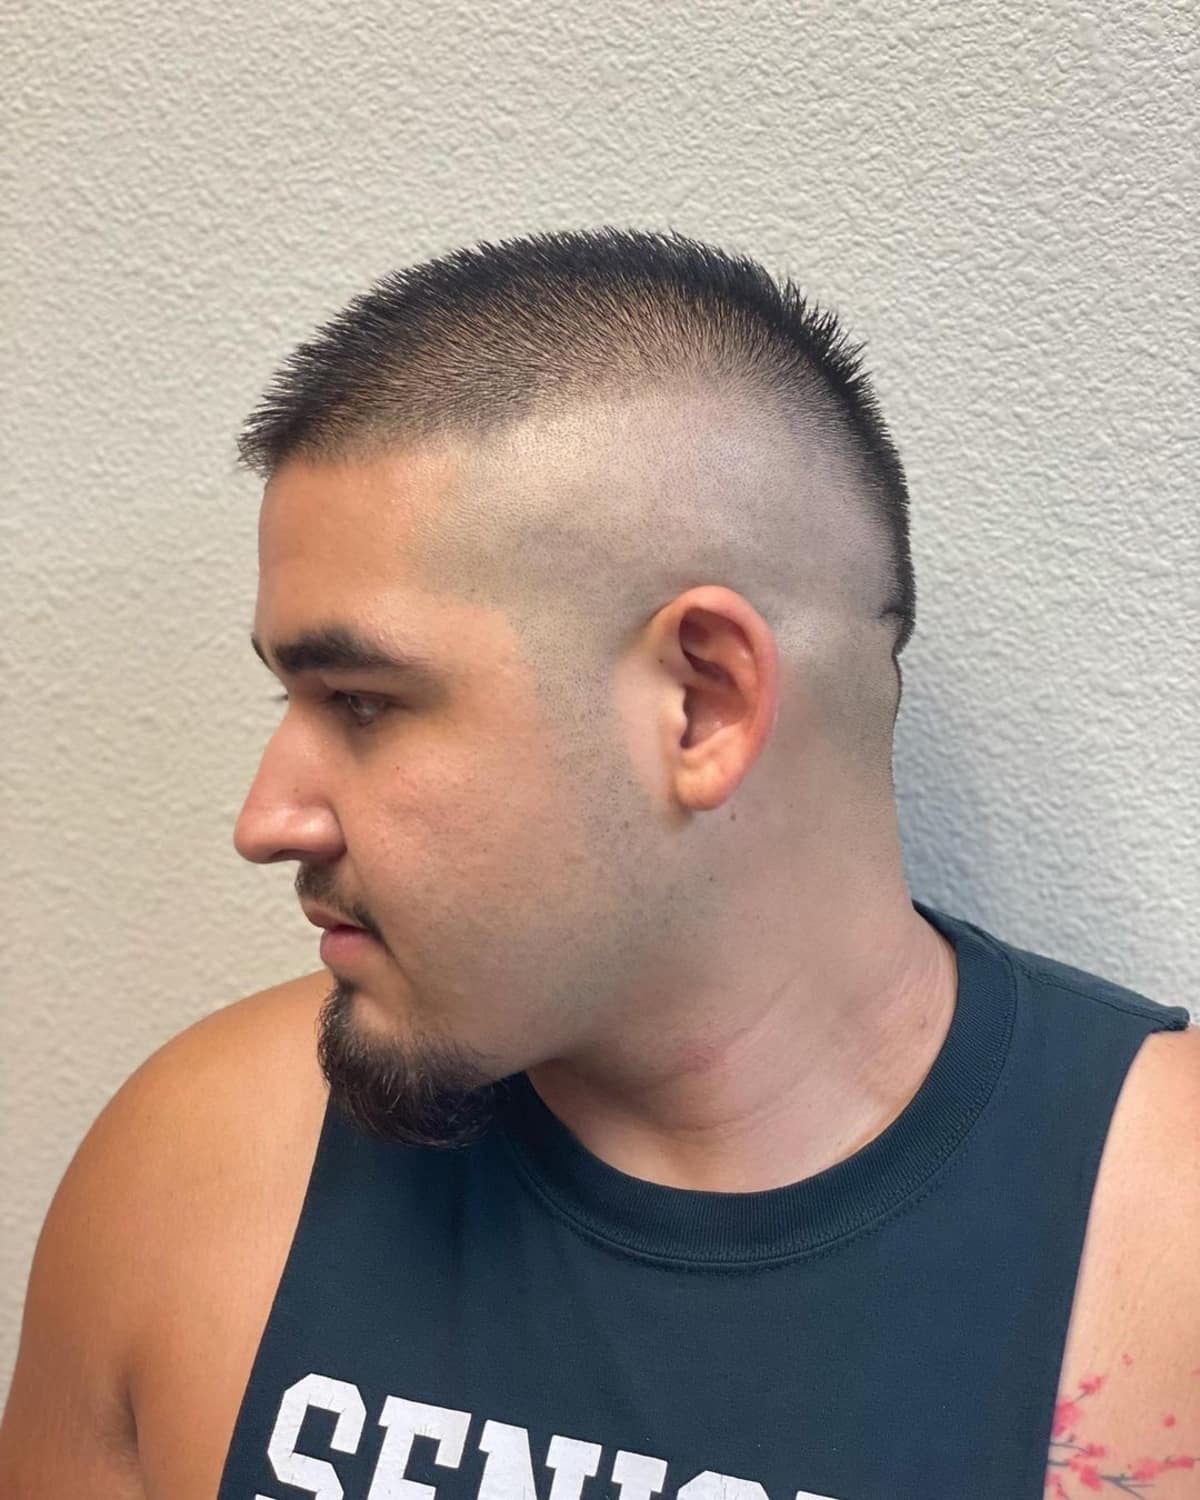 Trendy Mohawk-inspired buzz cut for guys